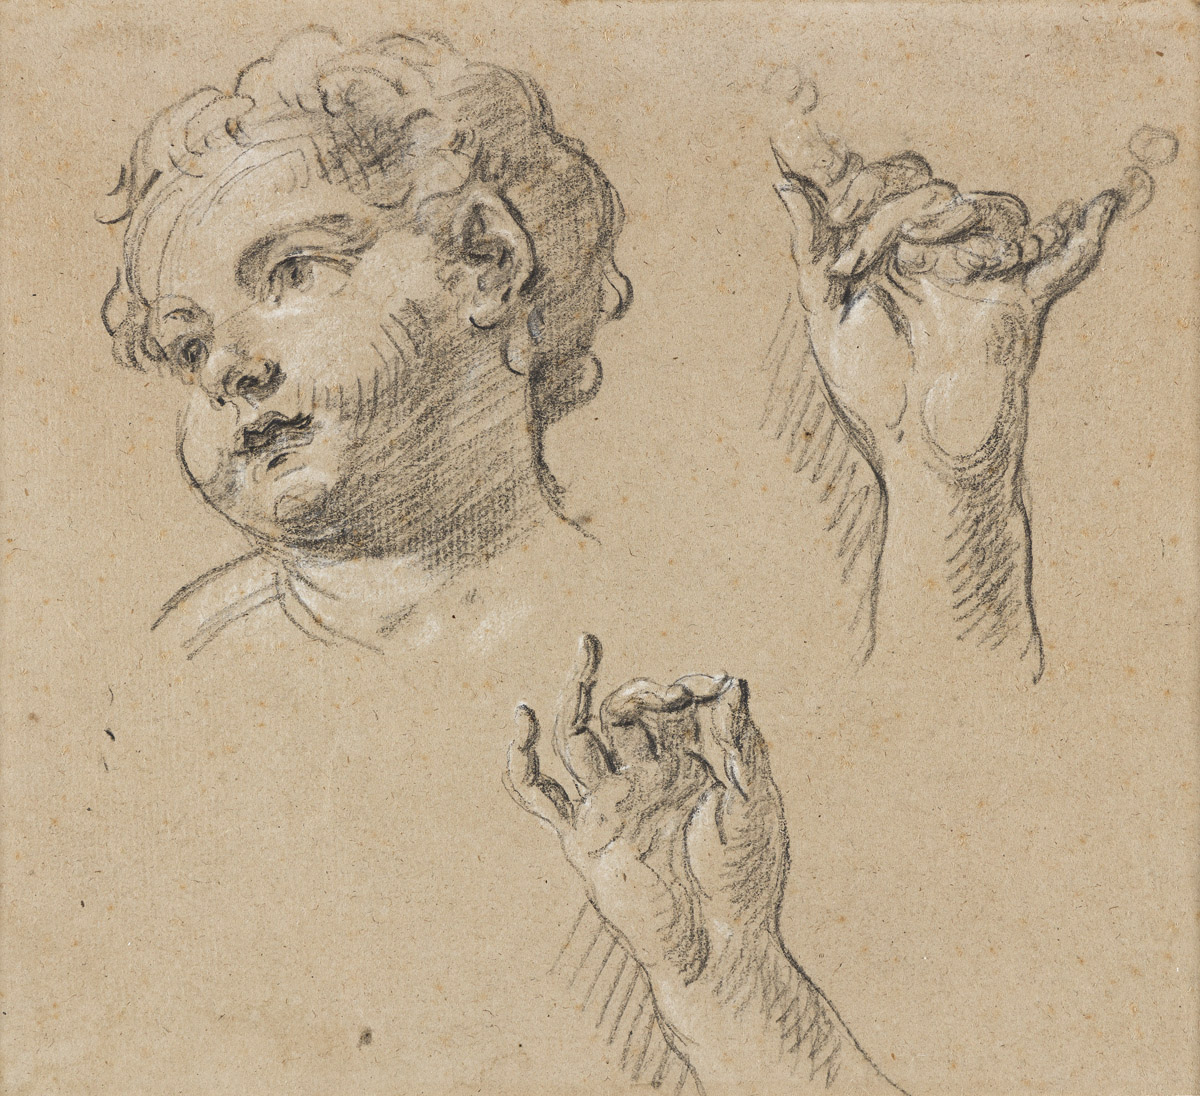 CHARLES PARROCEL (Paris 1688-1752 Paris) Sheet of Studies with a the Head of a Child and Two Hands.